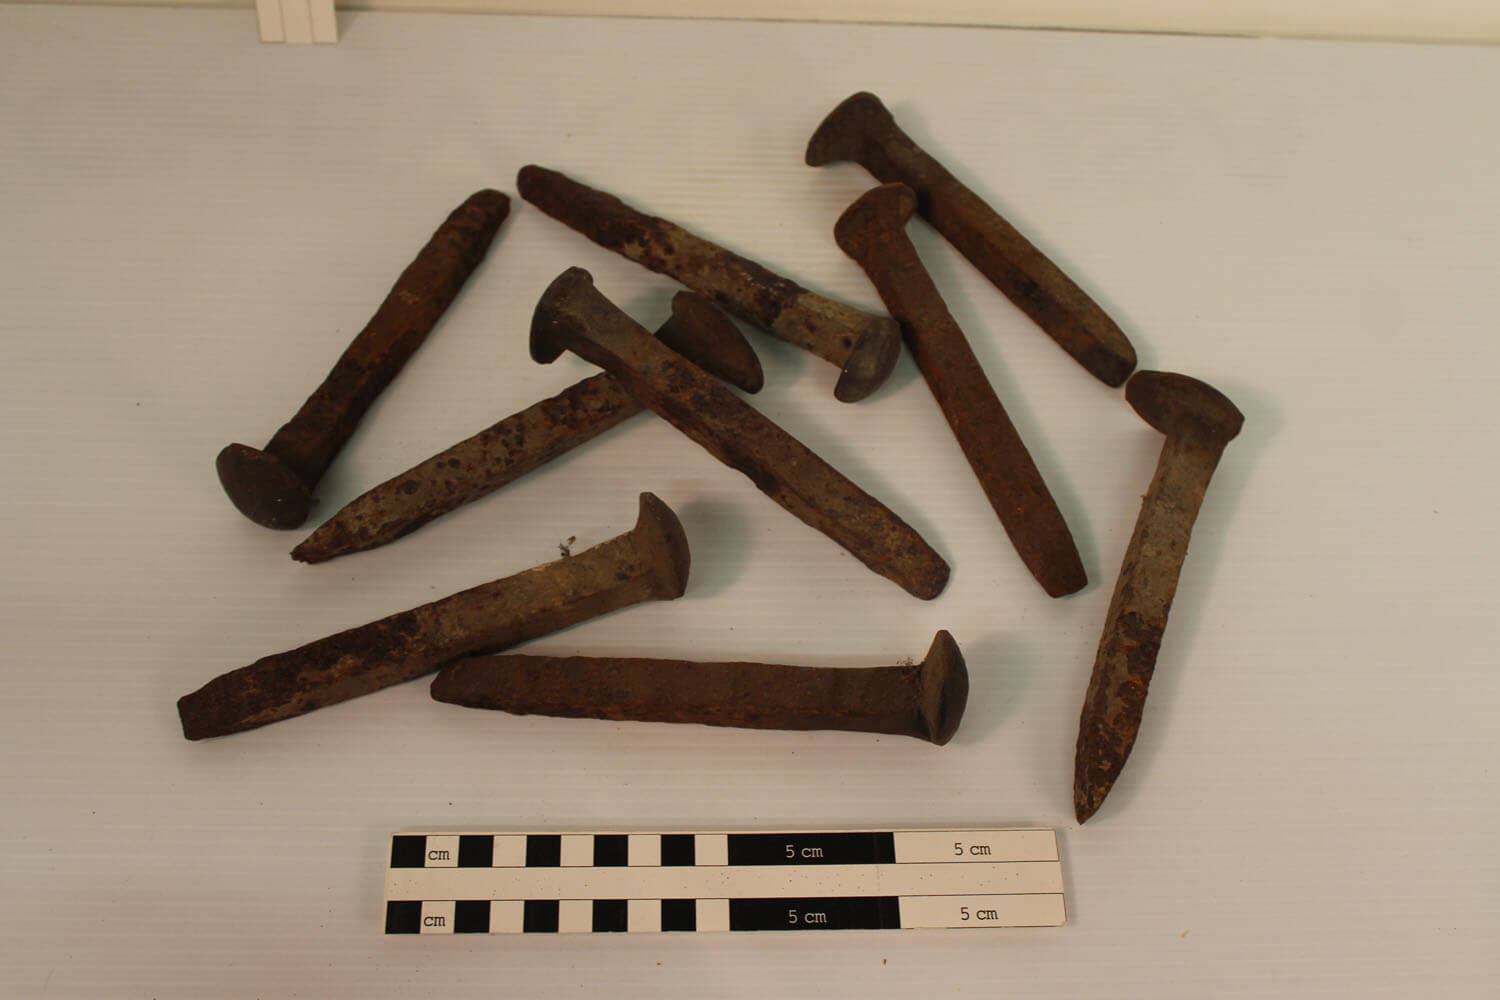 Much of the objects housed in the BLM Collection are rusted metal objects like tin cans, horseshoes and these railroad ties. BLM Collection.